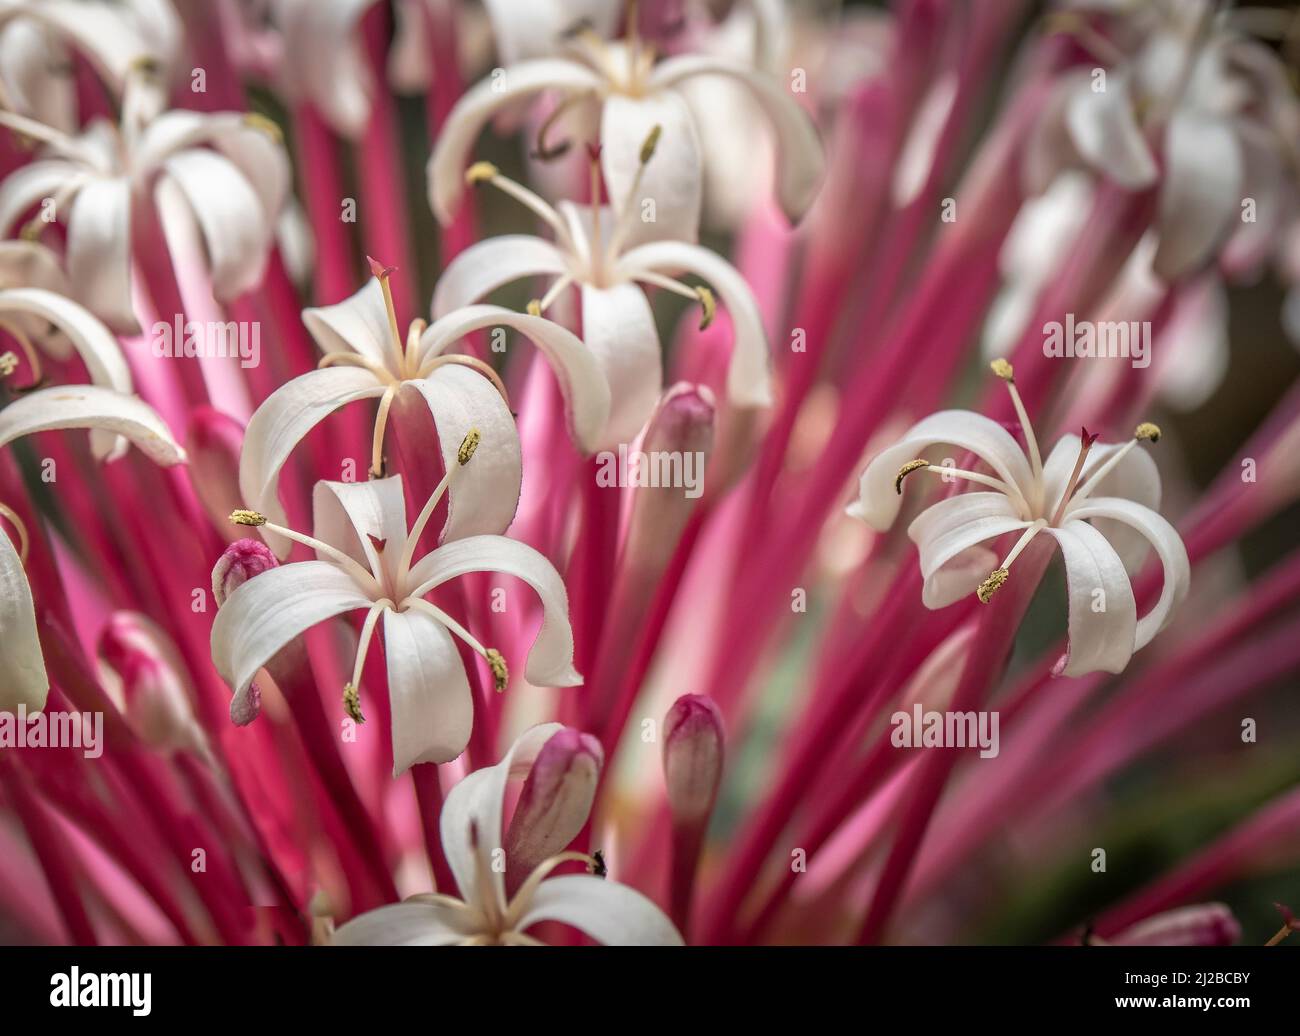 Closeup of white flowers of Starburst or shooting star clerodendrum (Clerodendrum quadriloculare) Stock Photo